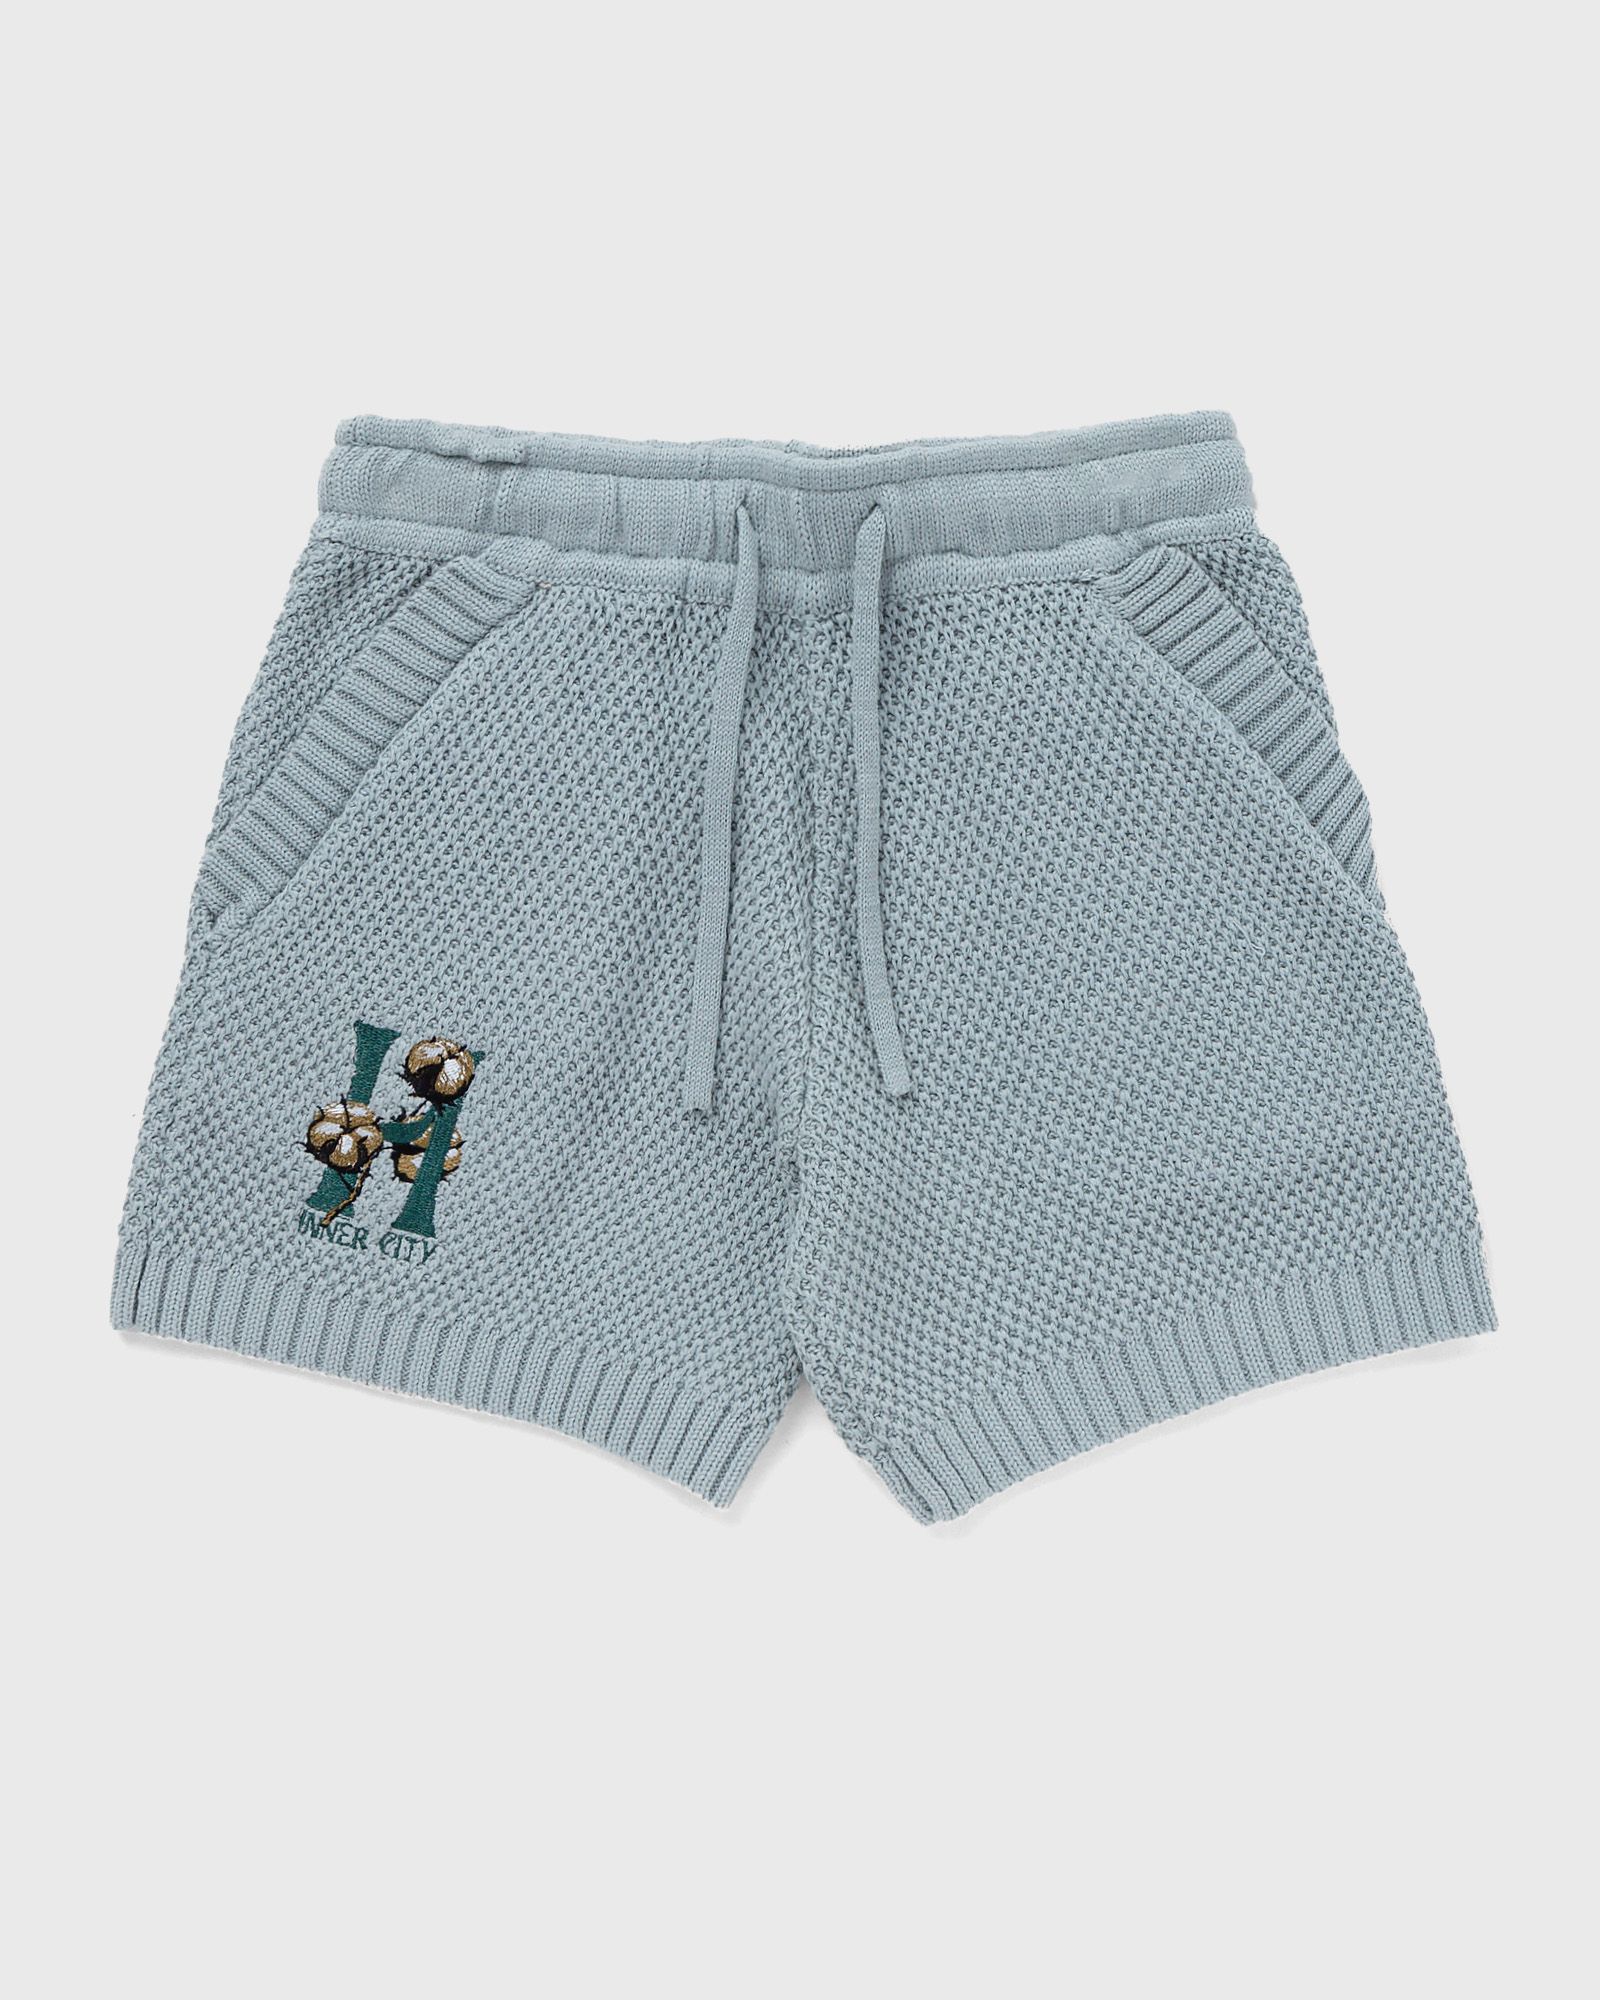 Honor The Gift - knit h shorts  shorts blue in größe:age 2-4 | eu 92-104